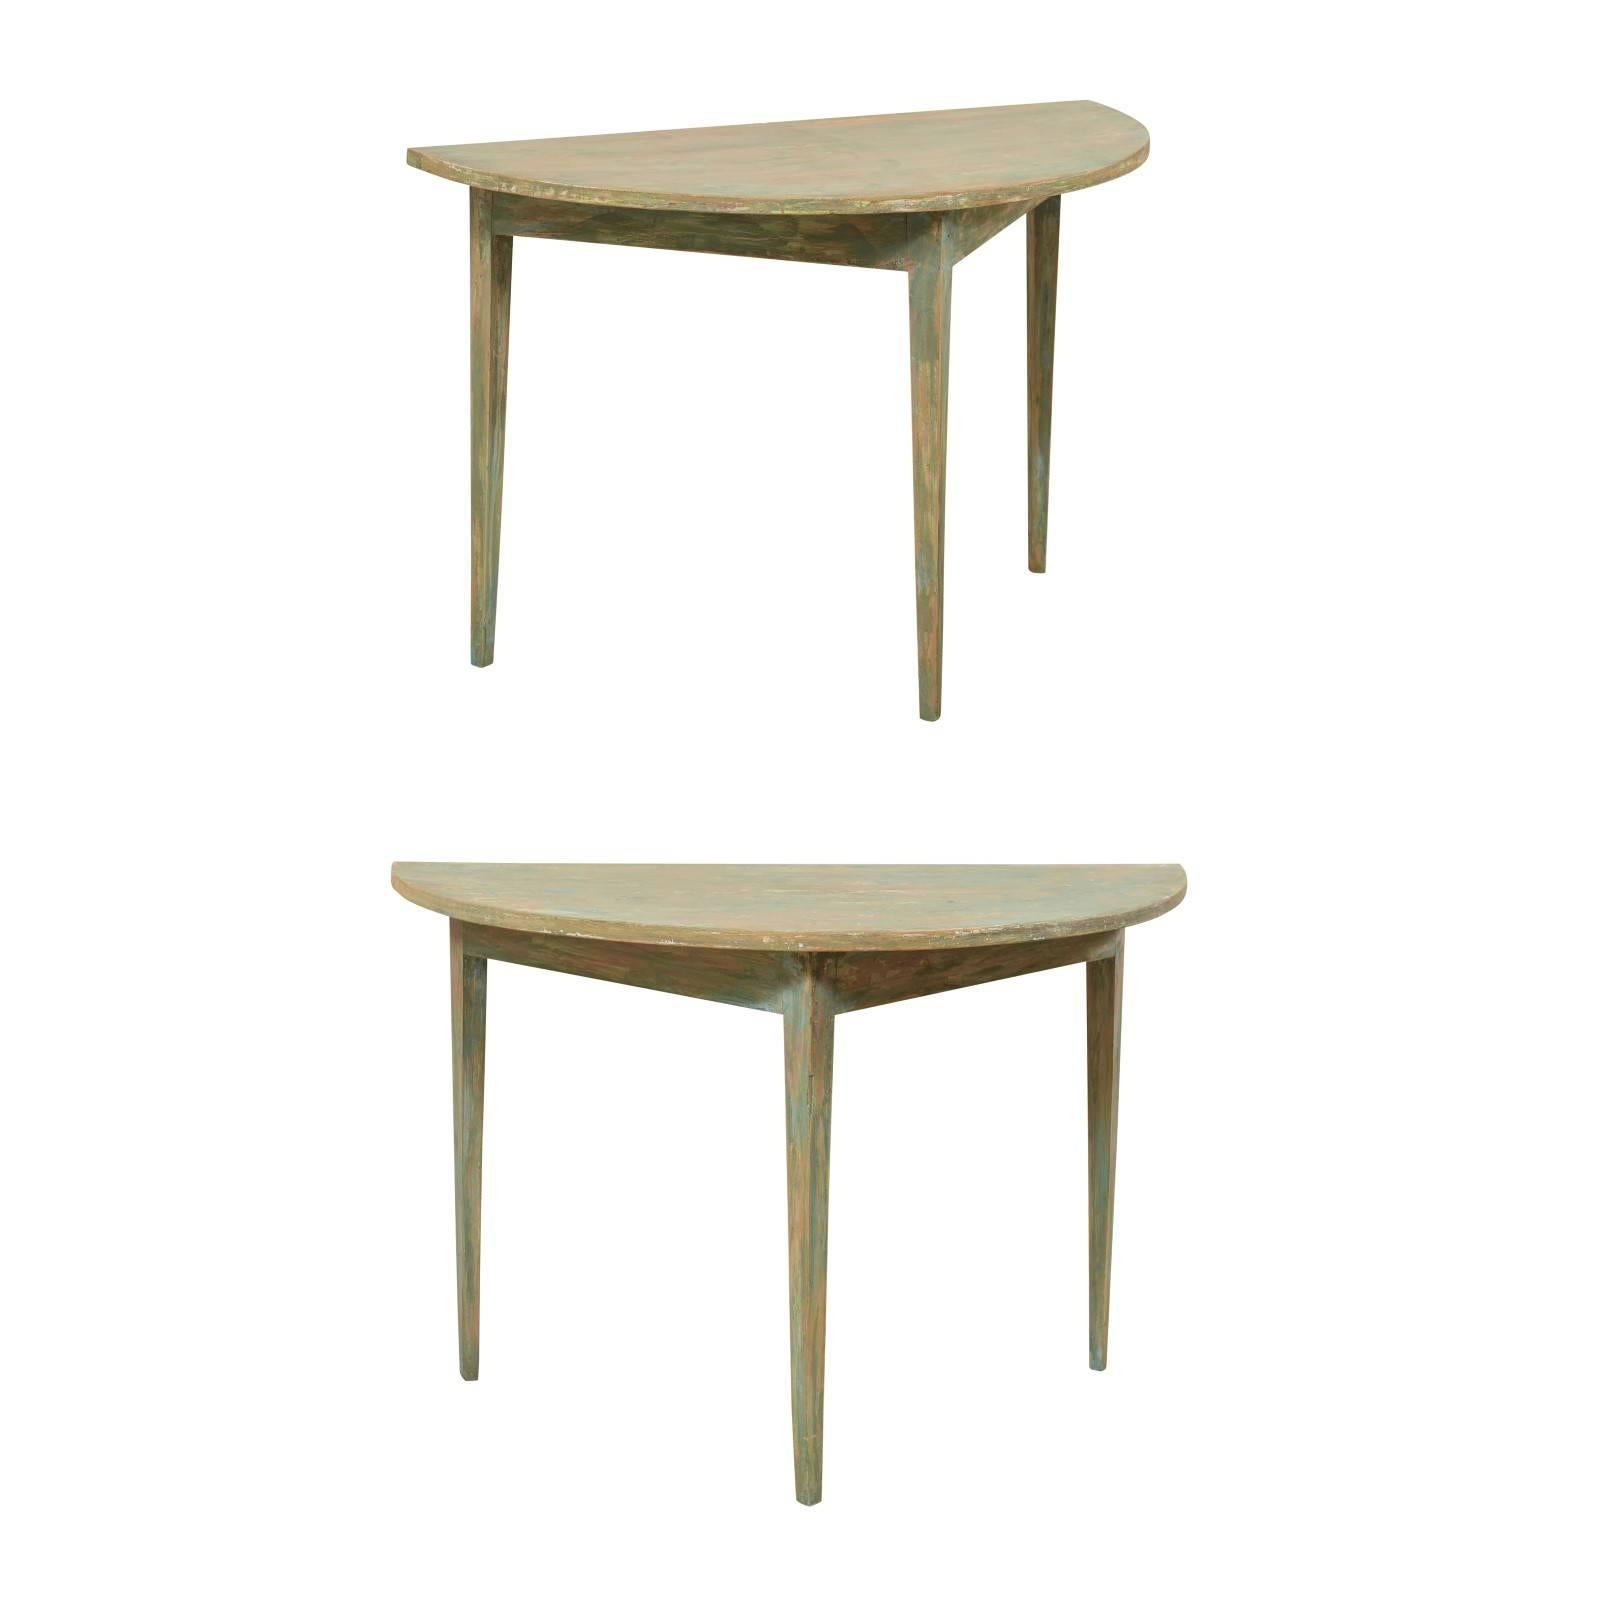 Pair of Swedish 19th Century Painted Wood Demilune Tables with Tapered Legs